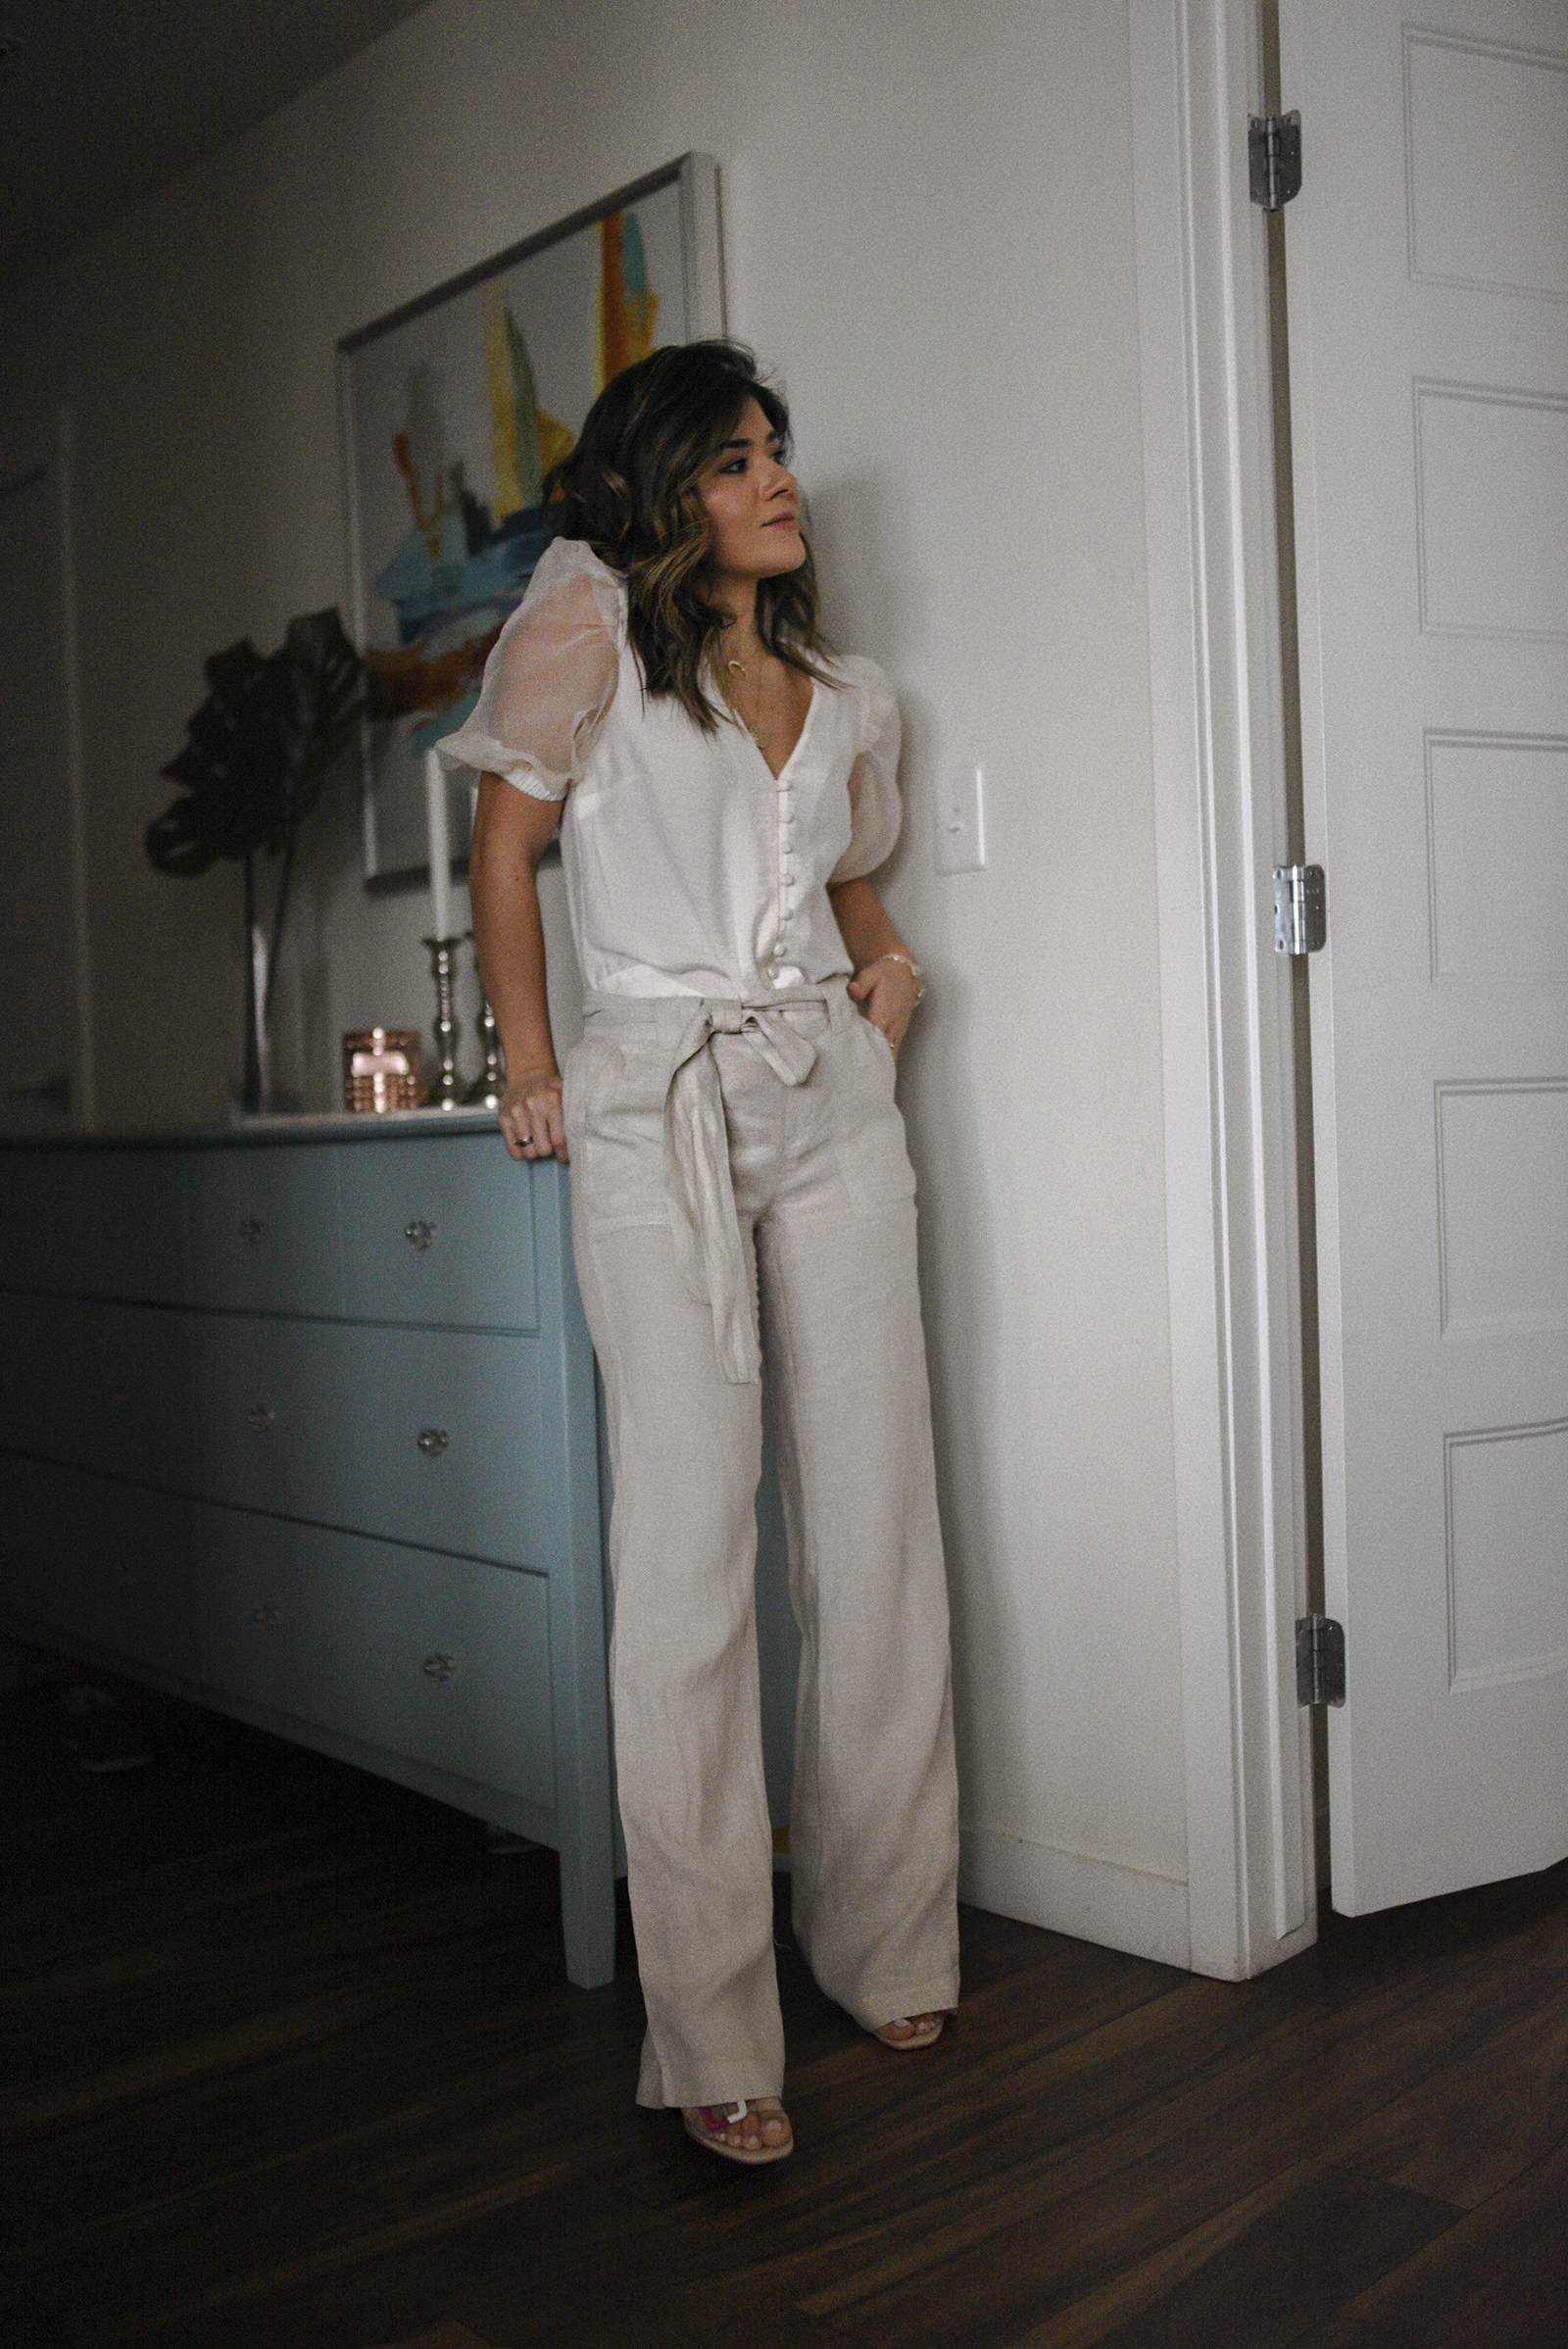 Carolina Hellal of Chic Talk wearing pieces from the Nordstrom spring sale 2020